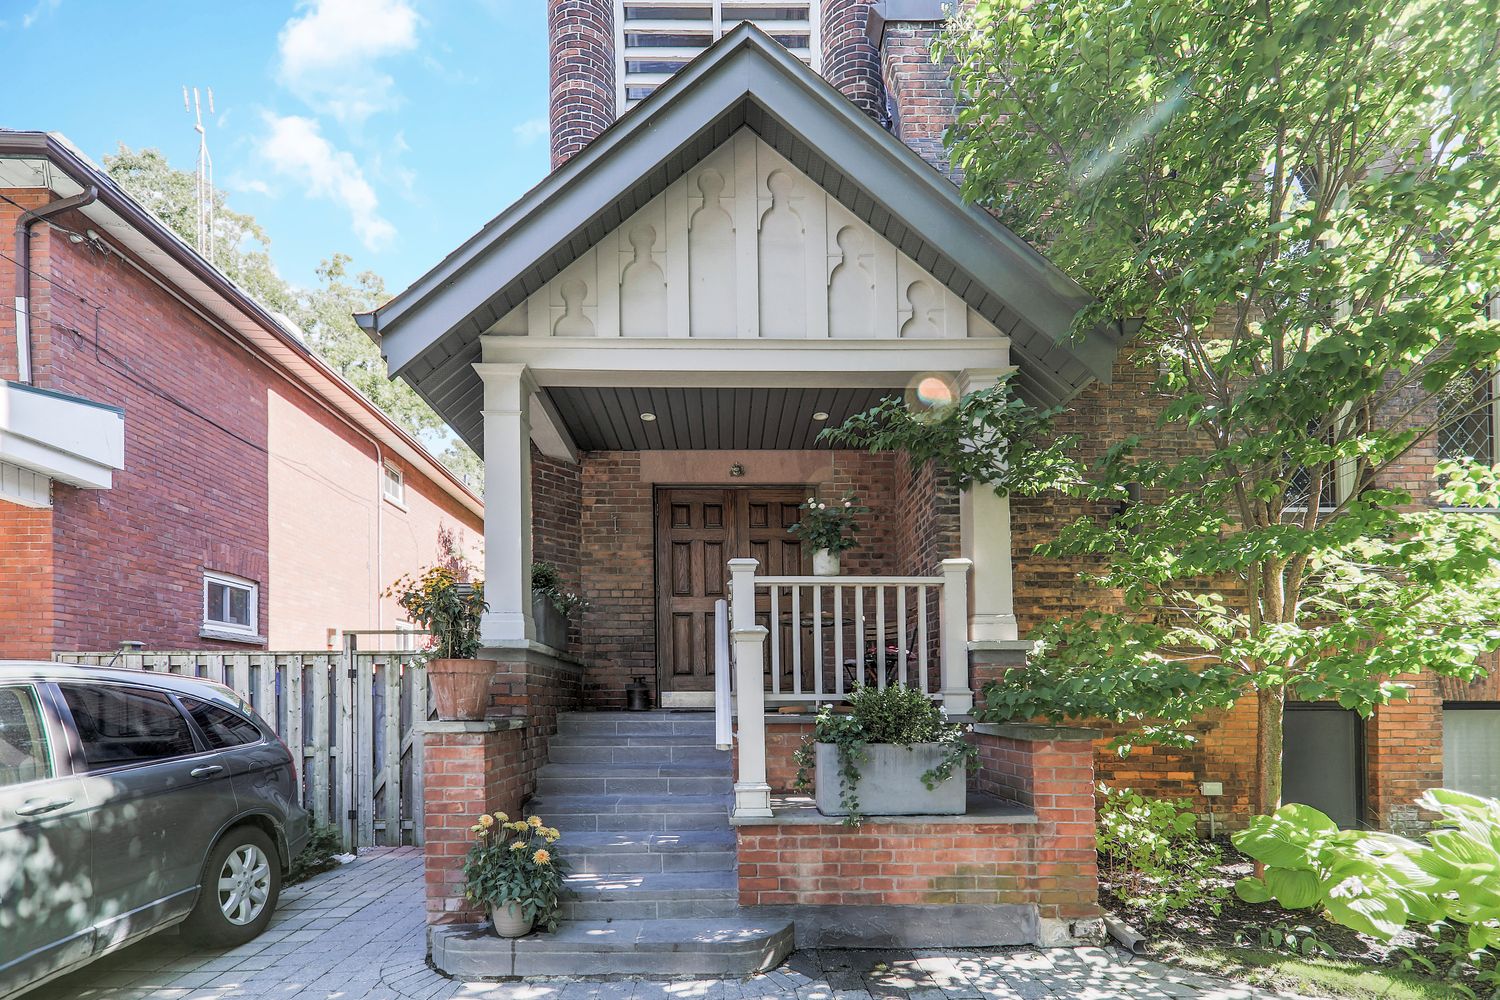 21 Swanwick Avenue. The Swanwick is located in  East End, Toronto - image #4 of 4